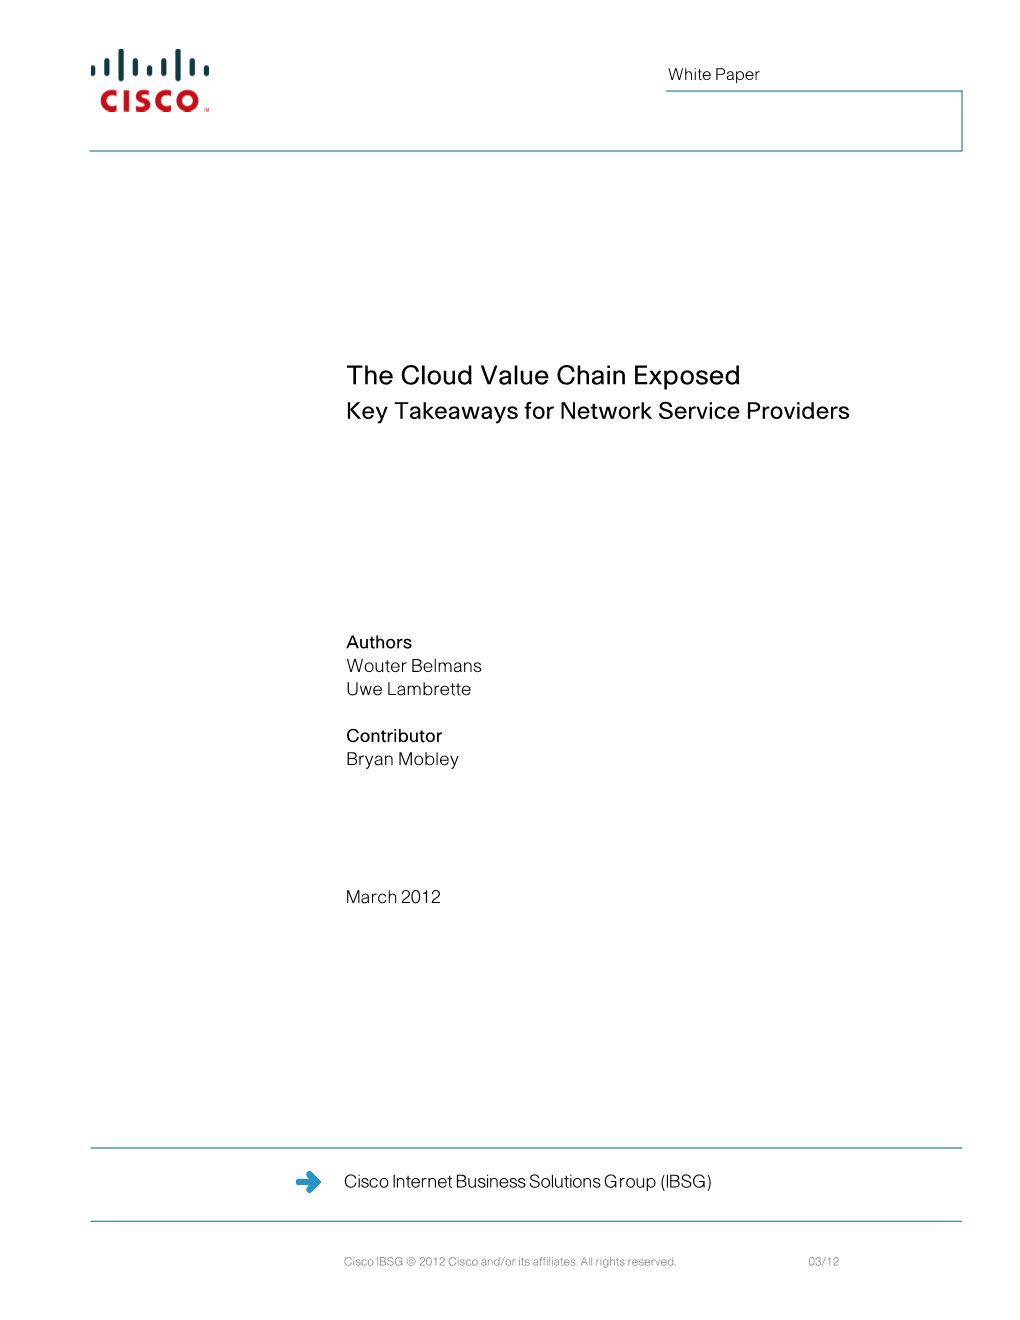 The Cloud Value Chain Exposed Key Takeaways for Network Service Providers Cisco Internet Business Solutions Group (IBSG)